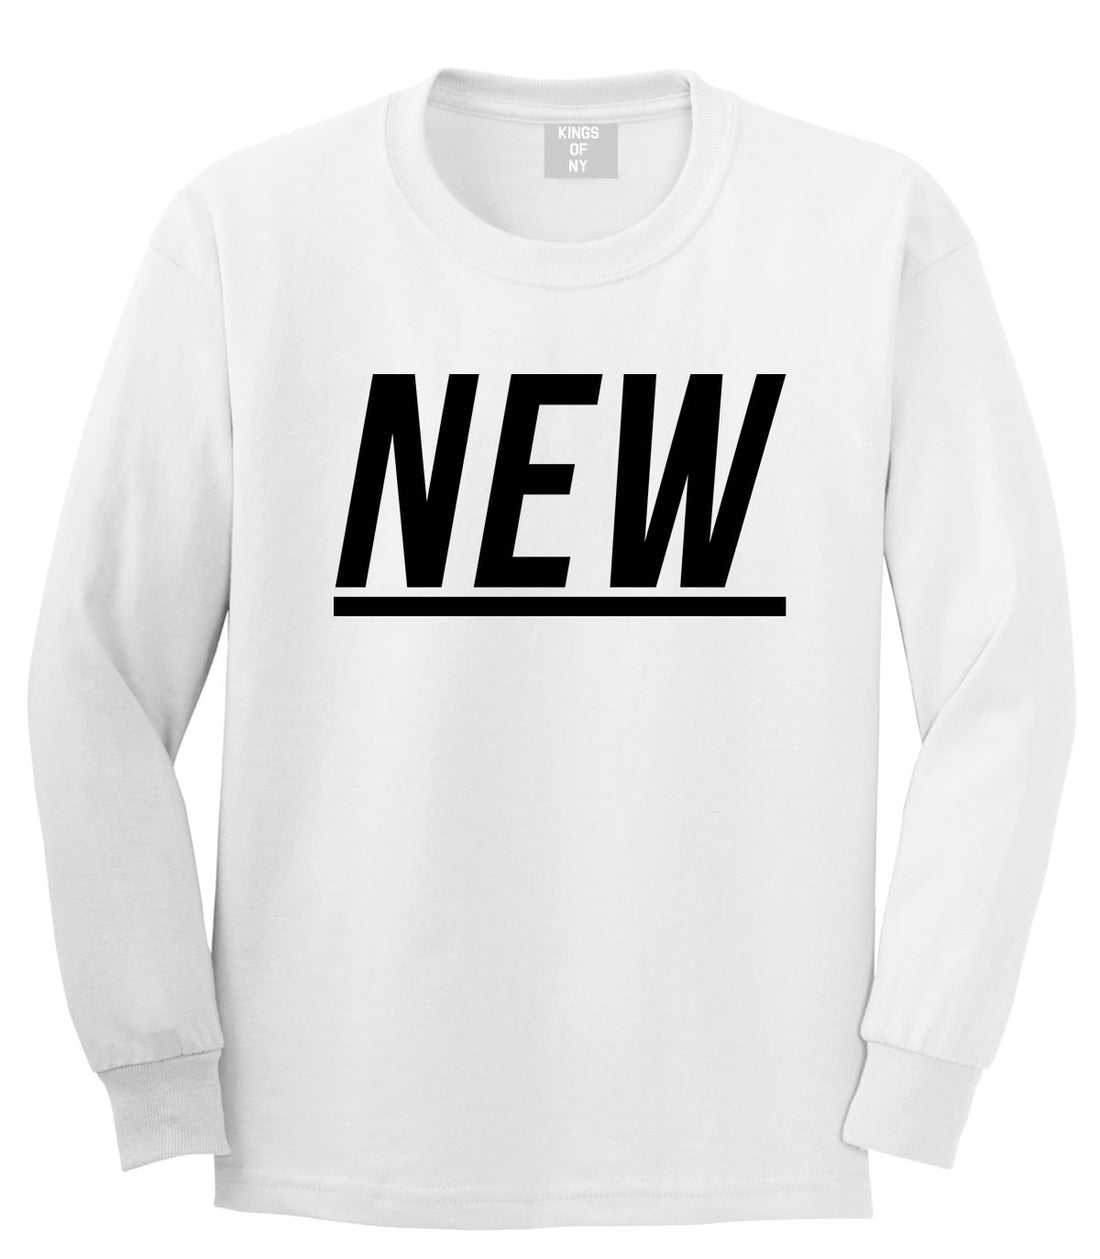 New Long Sleeve T-Shirt in White by Kings Of NY